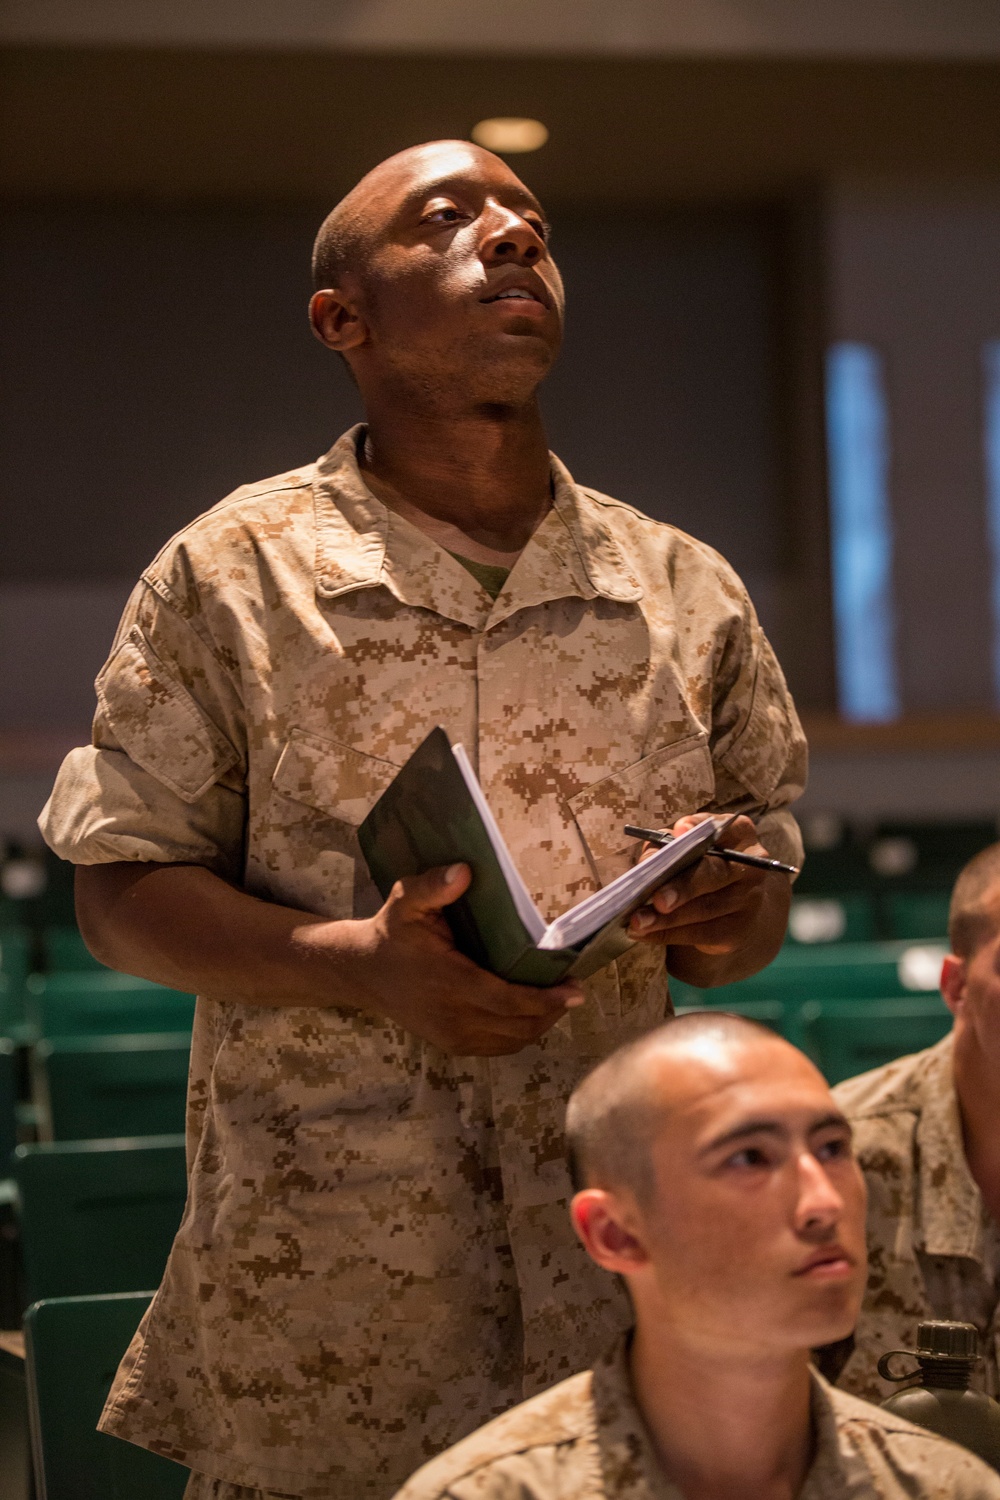 Marine recruits learn core values on Parris Island